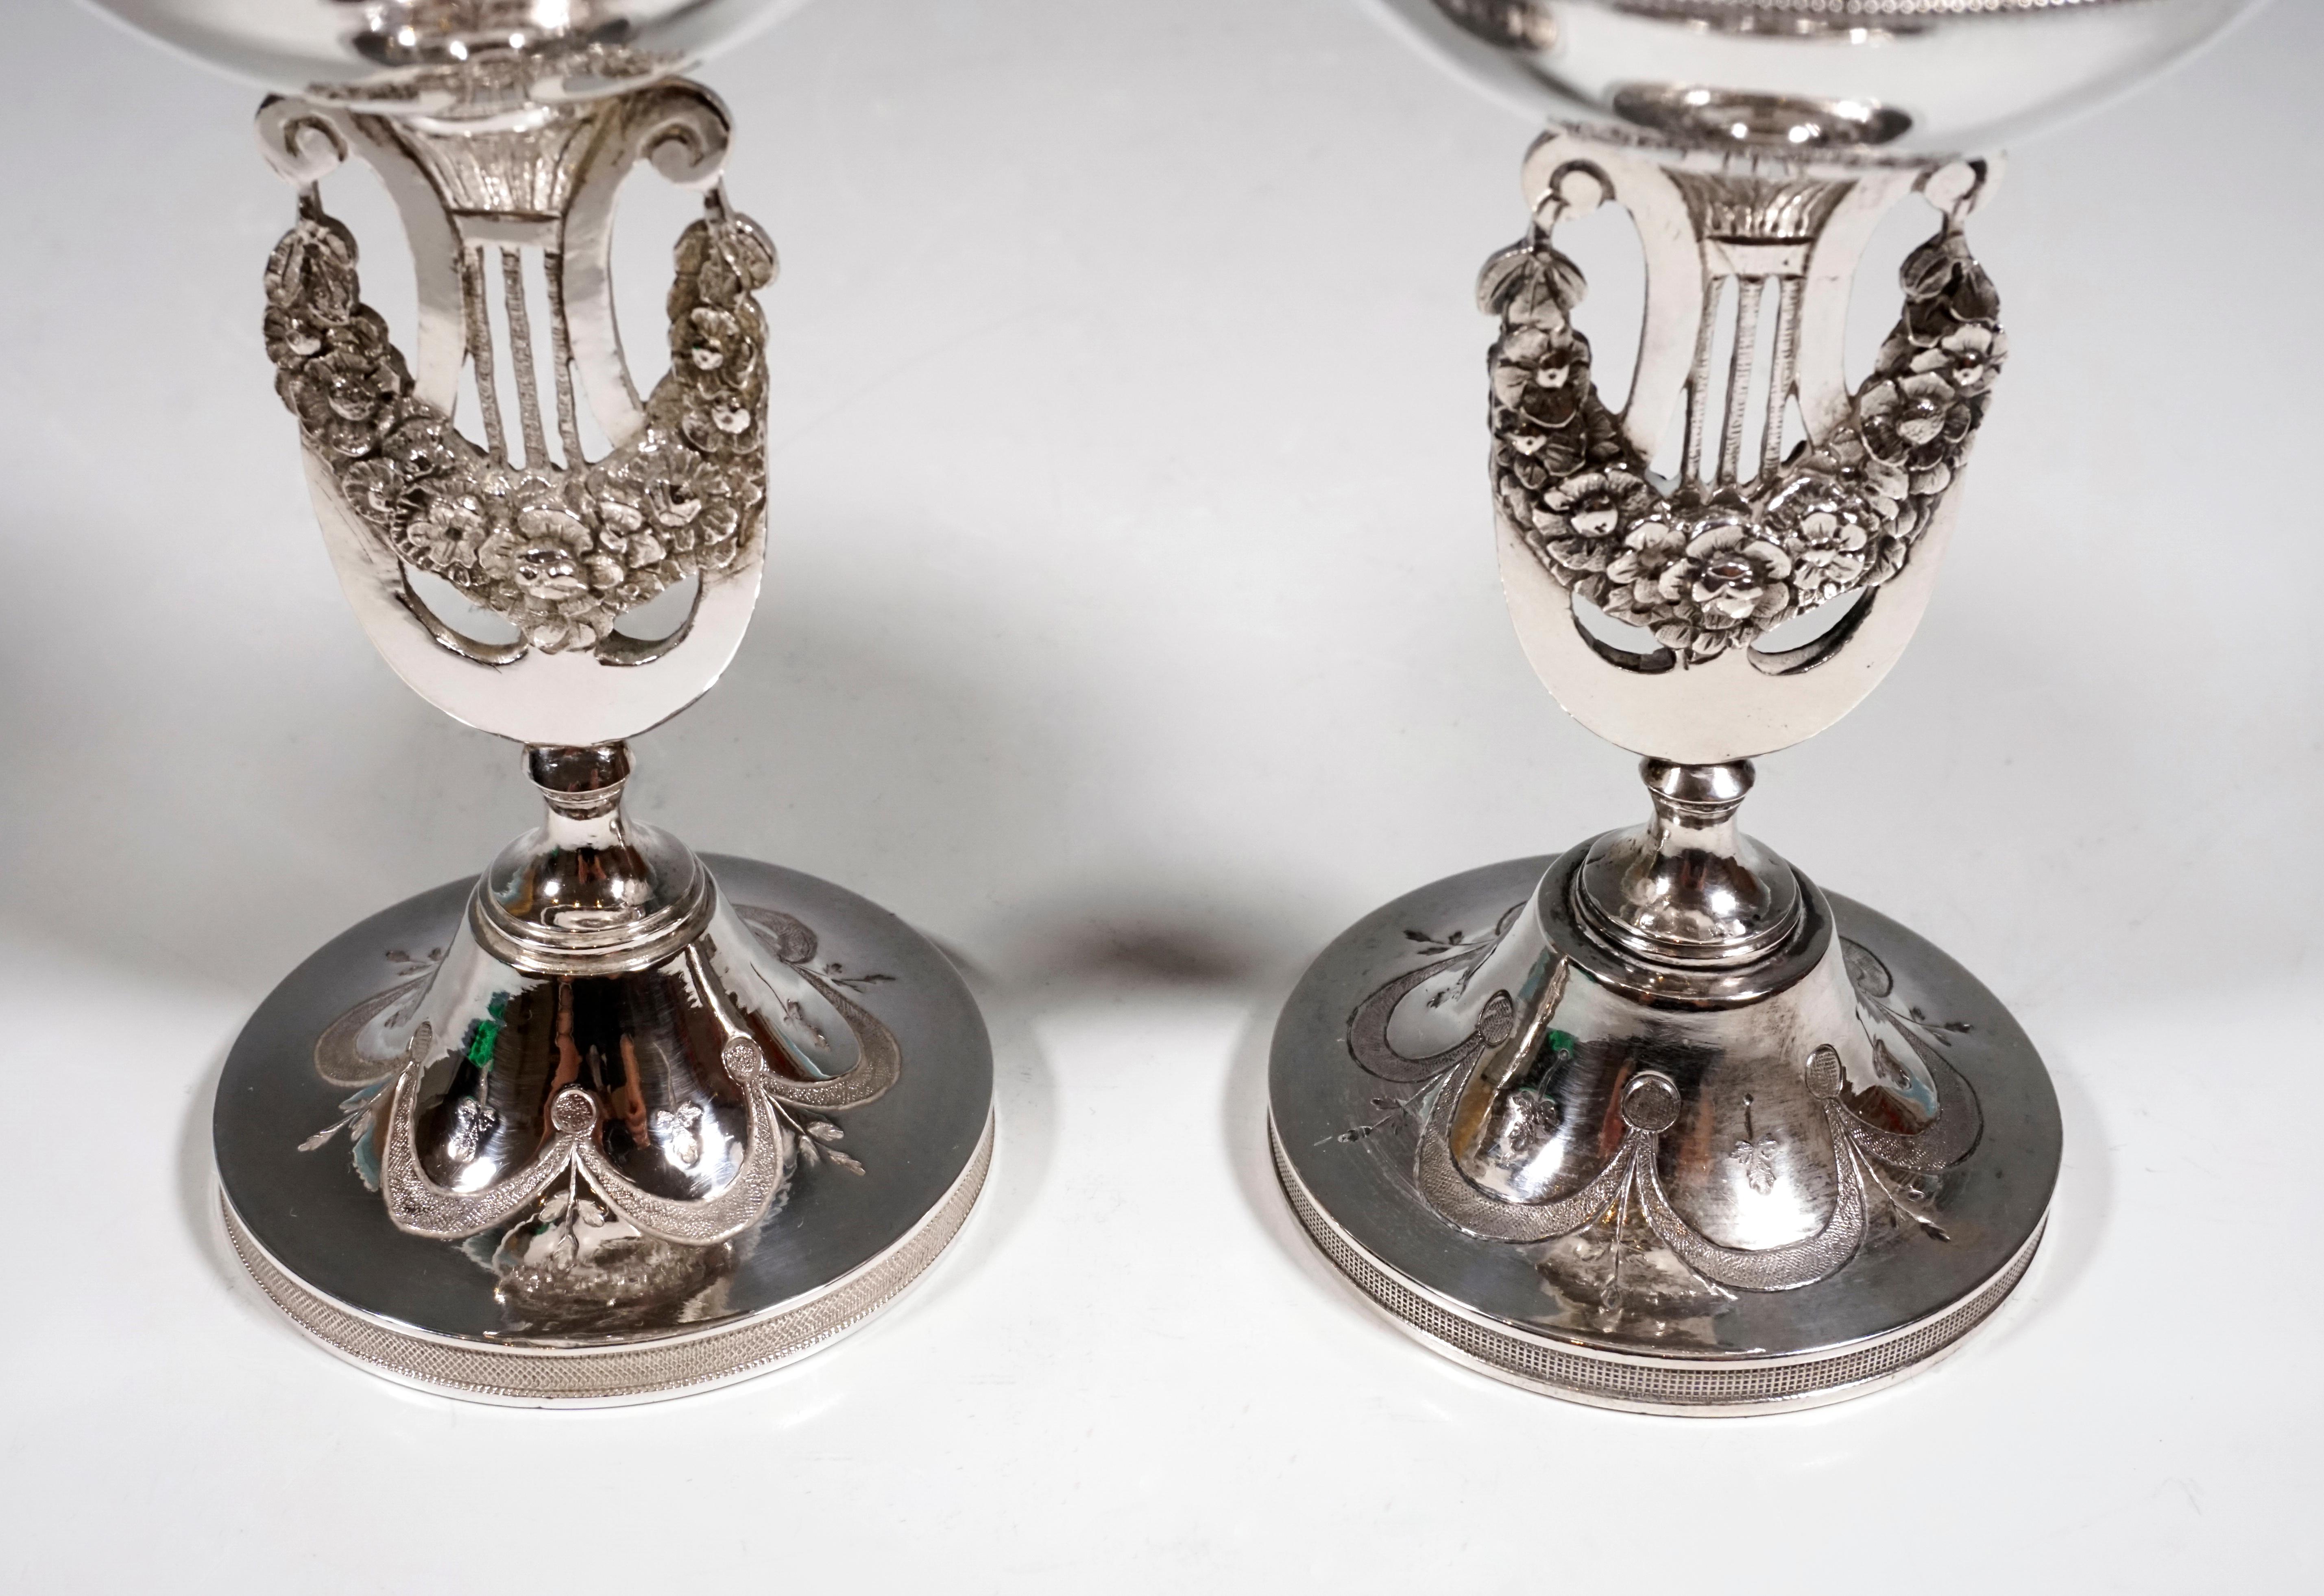 Early 19th Century Pair Of Antique Vienna Silver Empire Spice Bowls by Georg Kohlmayer, ca. 1815